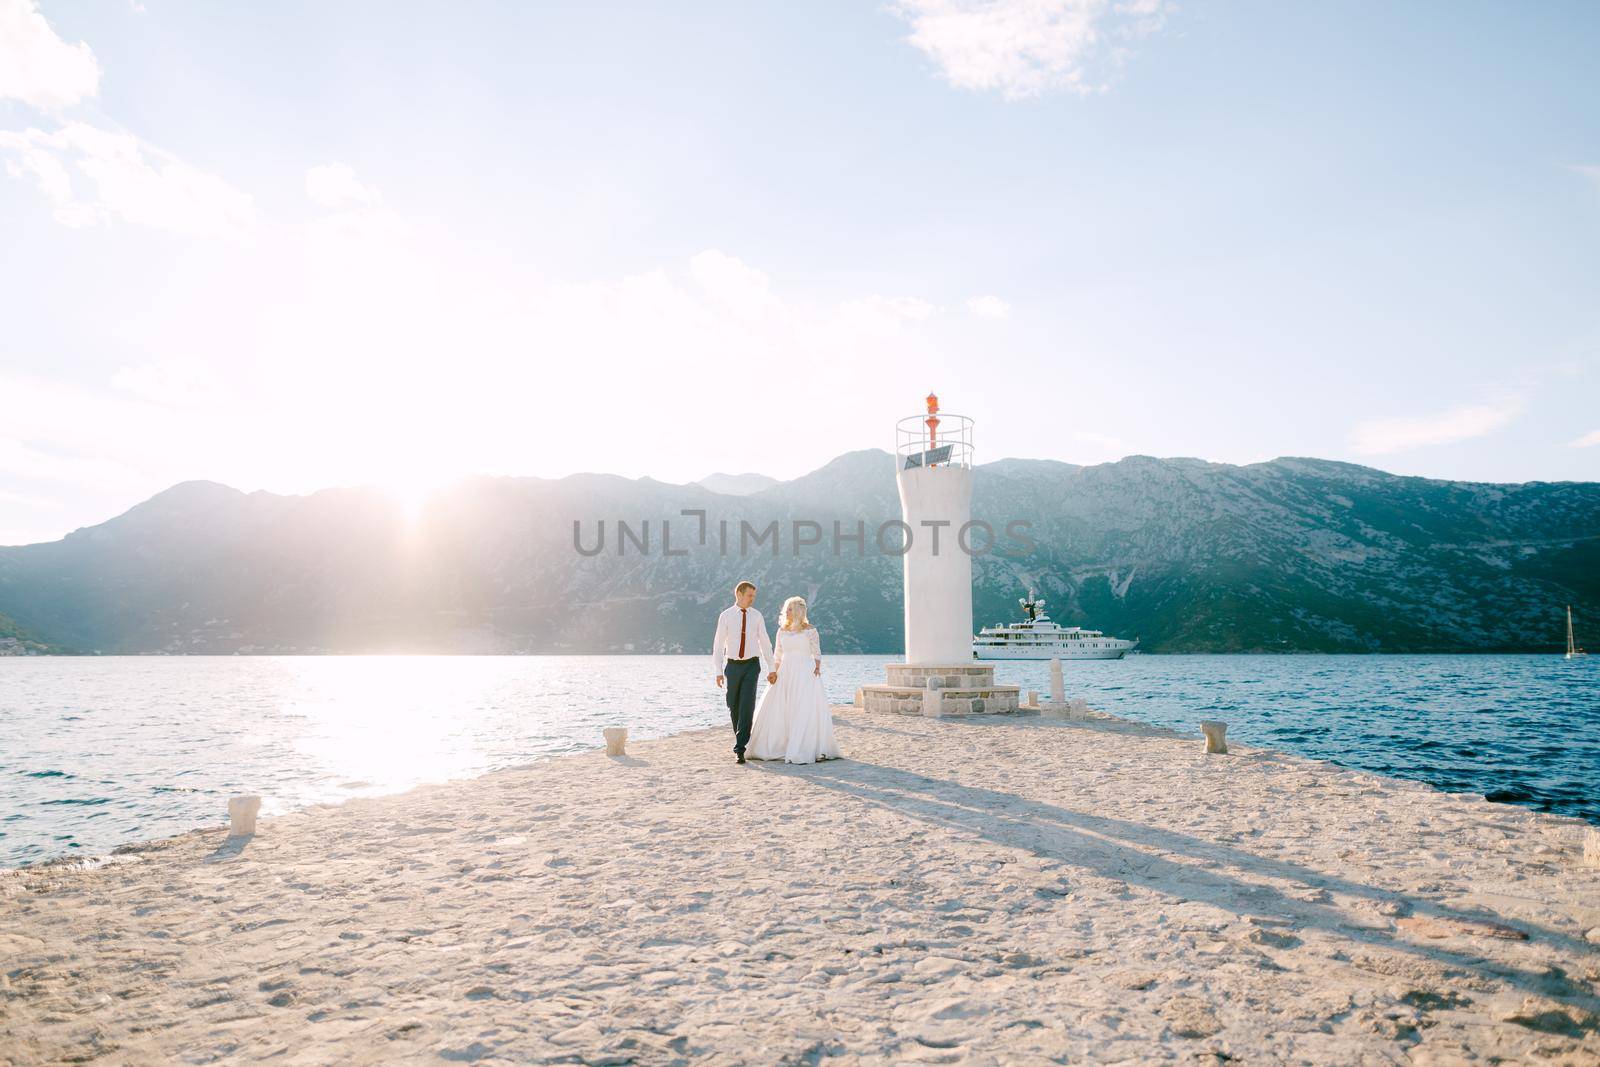 The bride and groom walk hand in hand near the lighthouse on the pier on the Our Lady of the Rocks island . High quality photo